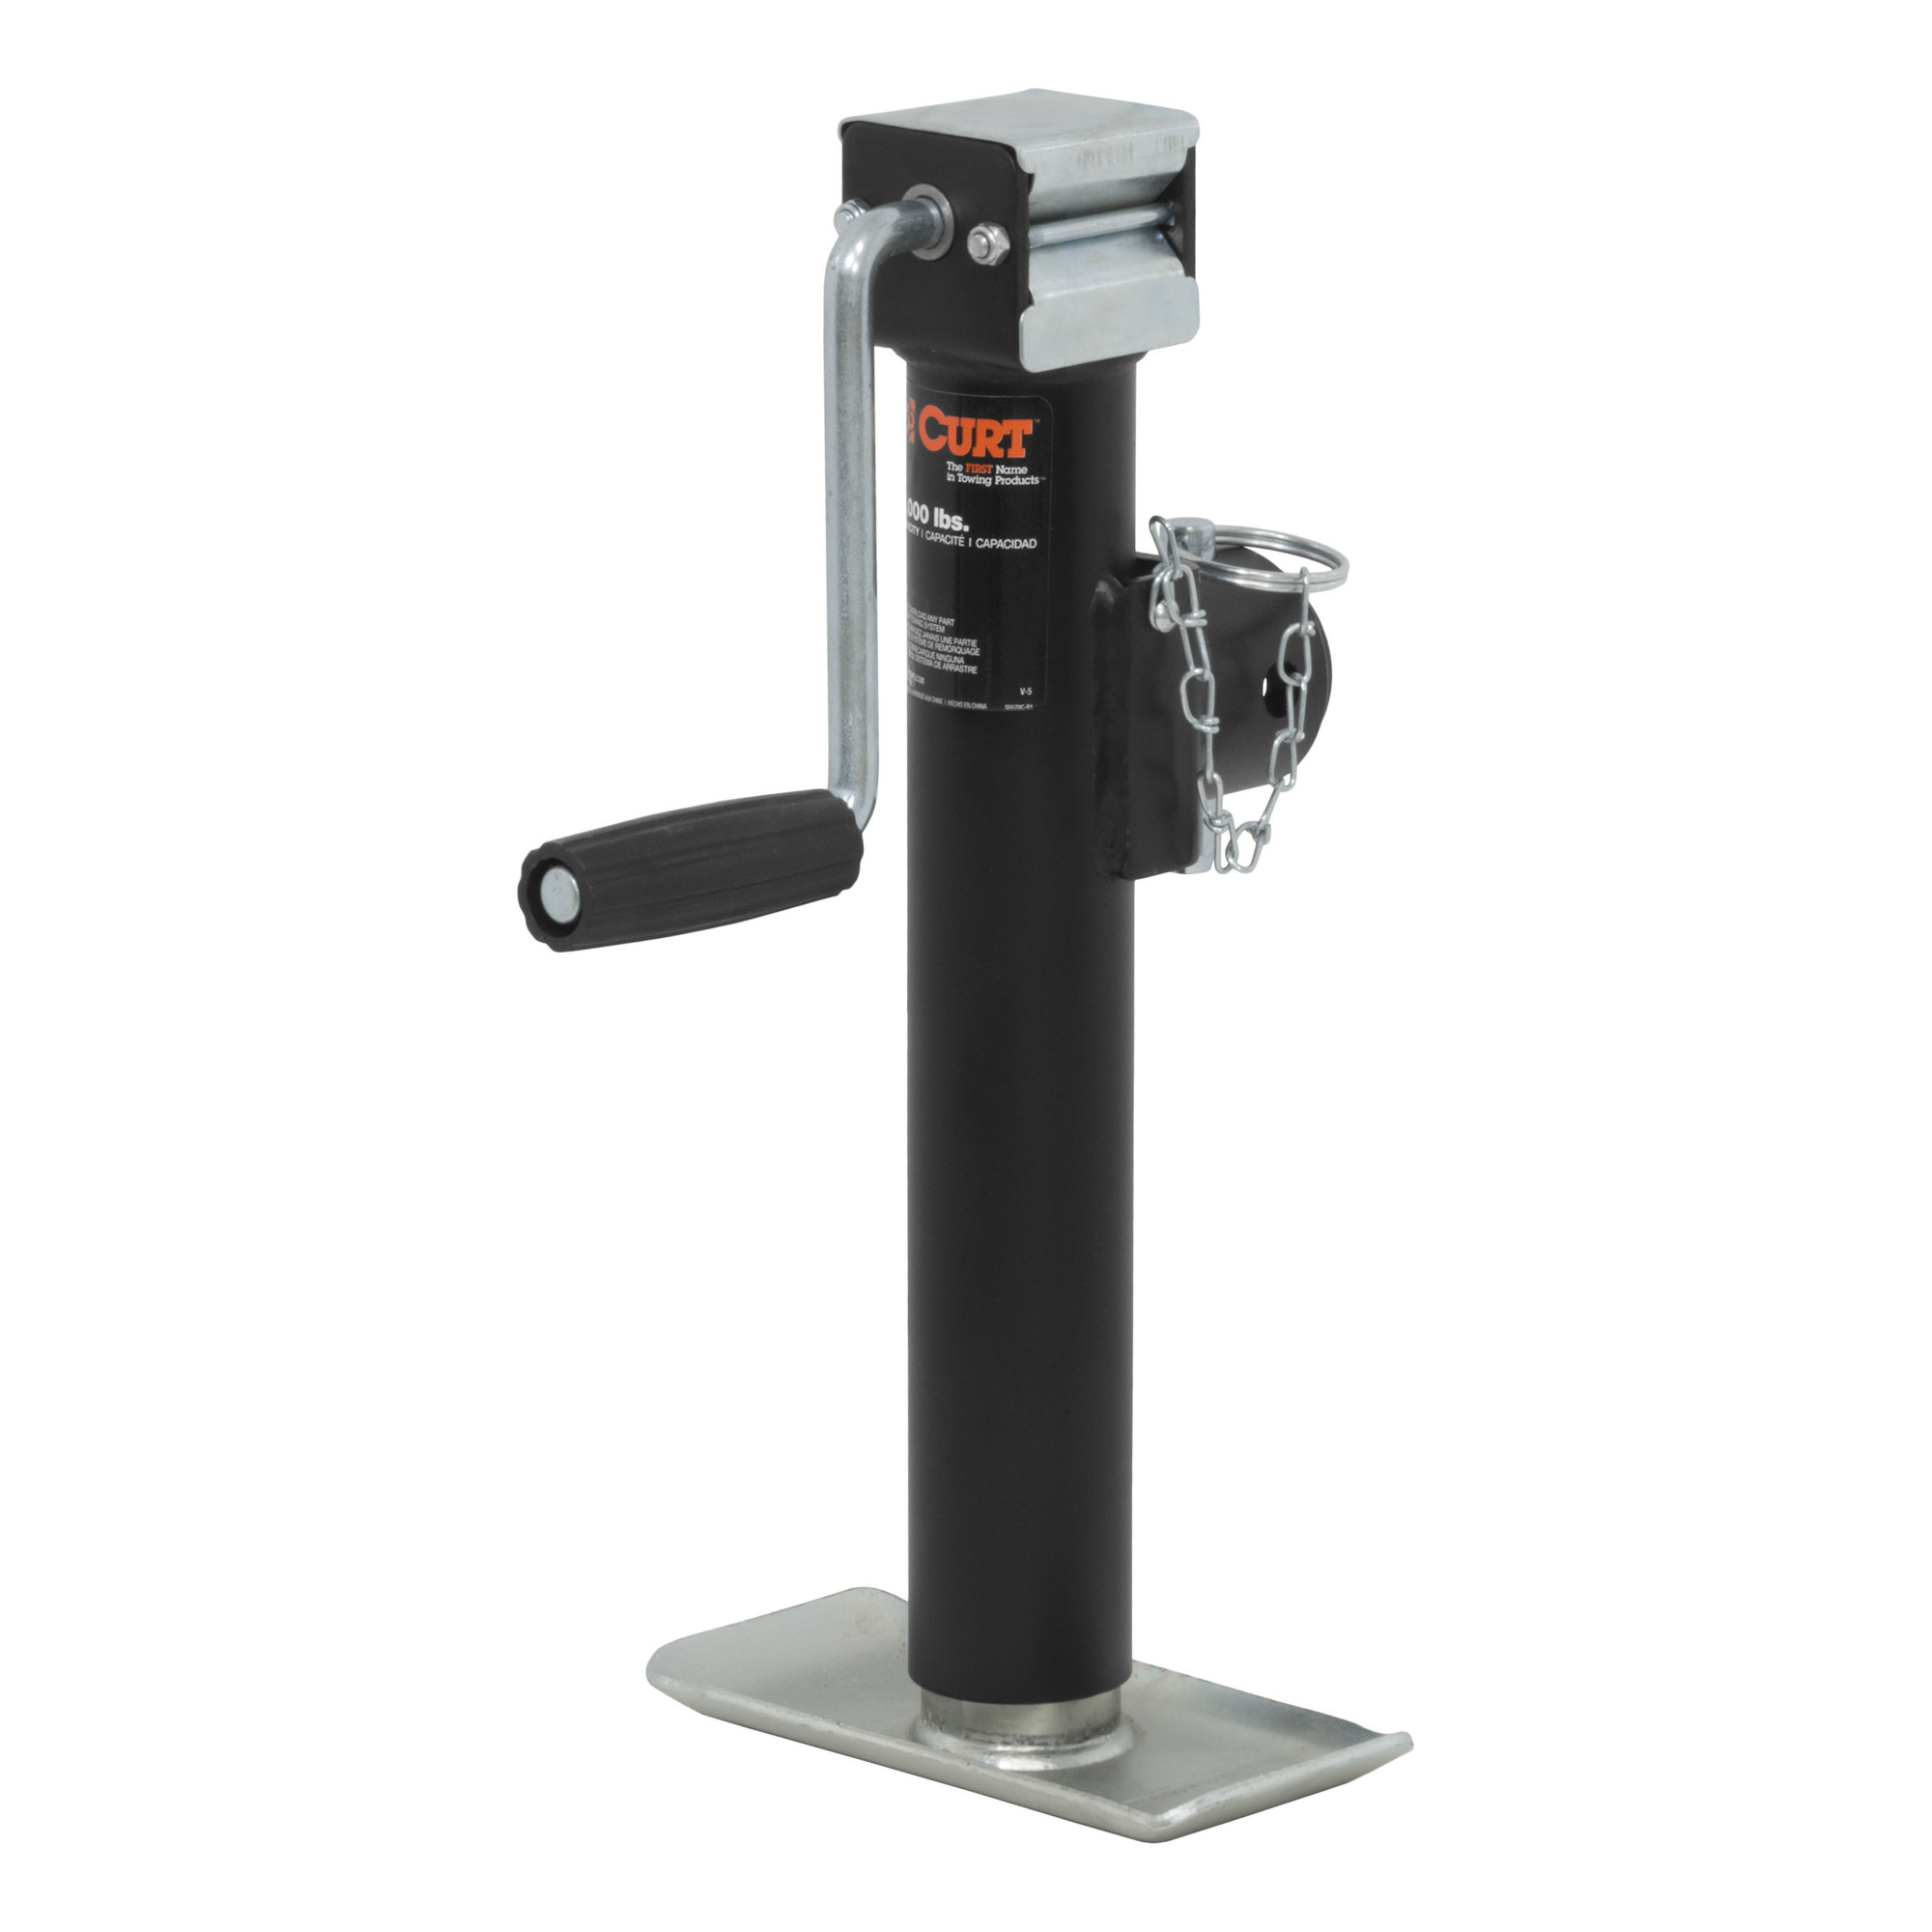 Curt Manufacturing, Pipe-Mnt Jack w Side Handle 2 000 lbs 10Inch Travel, Lift Capacity 2000 lb, Jack Type Sidewind, Mount Type Weld-On, Model 28321